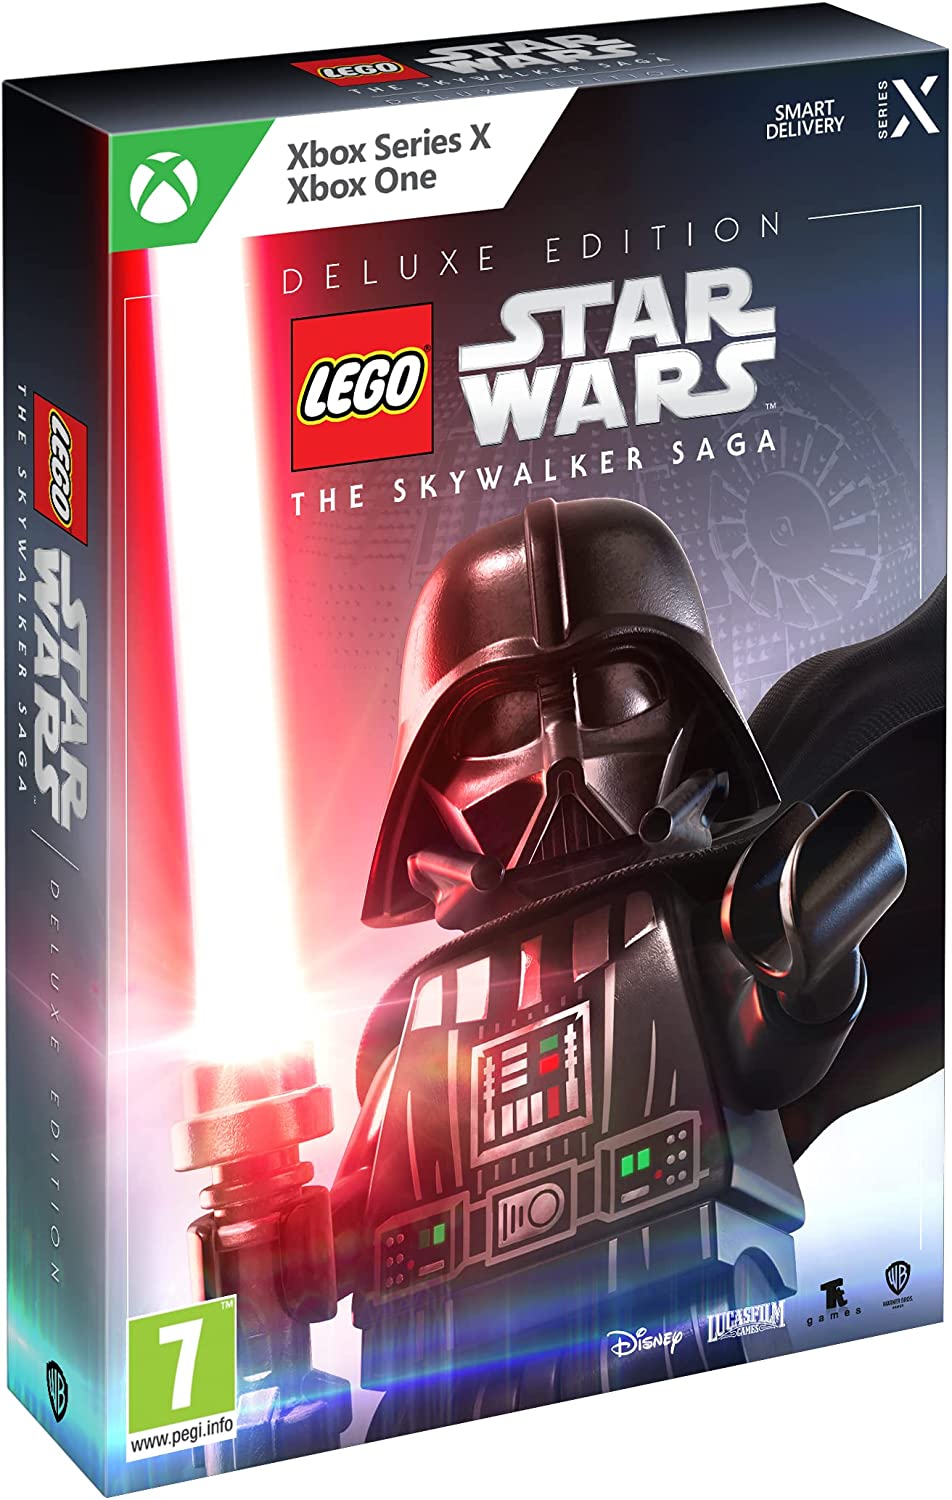 LEGO Star Wars The Skywalker Saga Deluxe Edition Xbox Game (With Exclusive Lego Blue Milk Luke Minifigure)